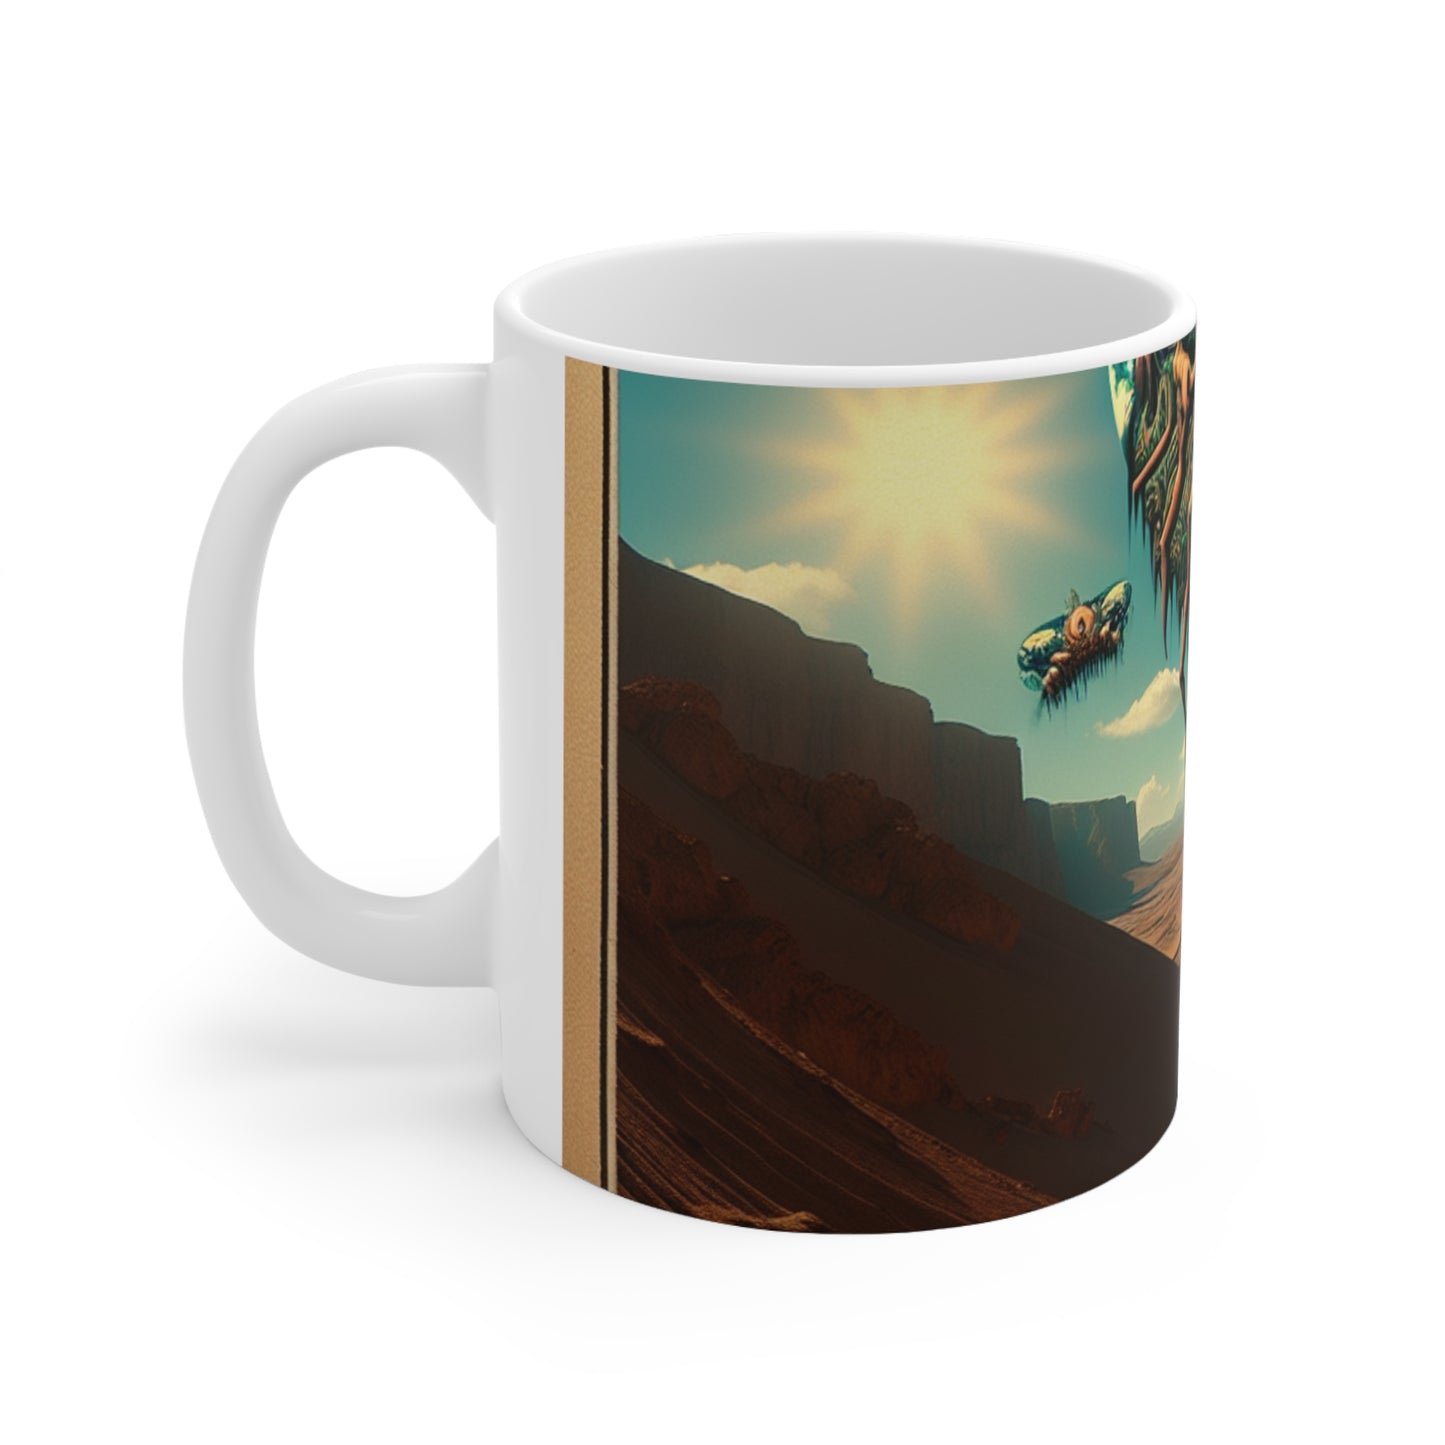 "Uprising in the Outback" - The Alien Ceramic Mug 11oz Surrealism Style